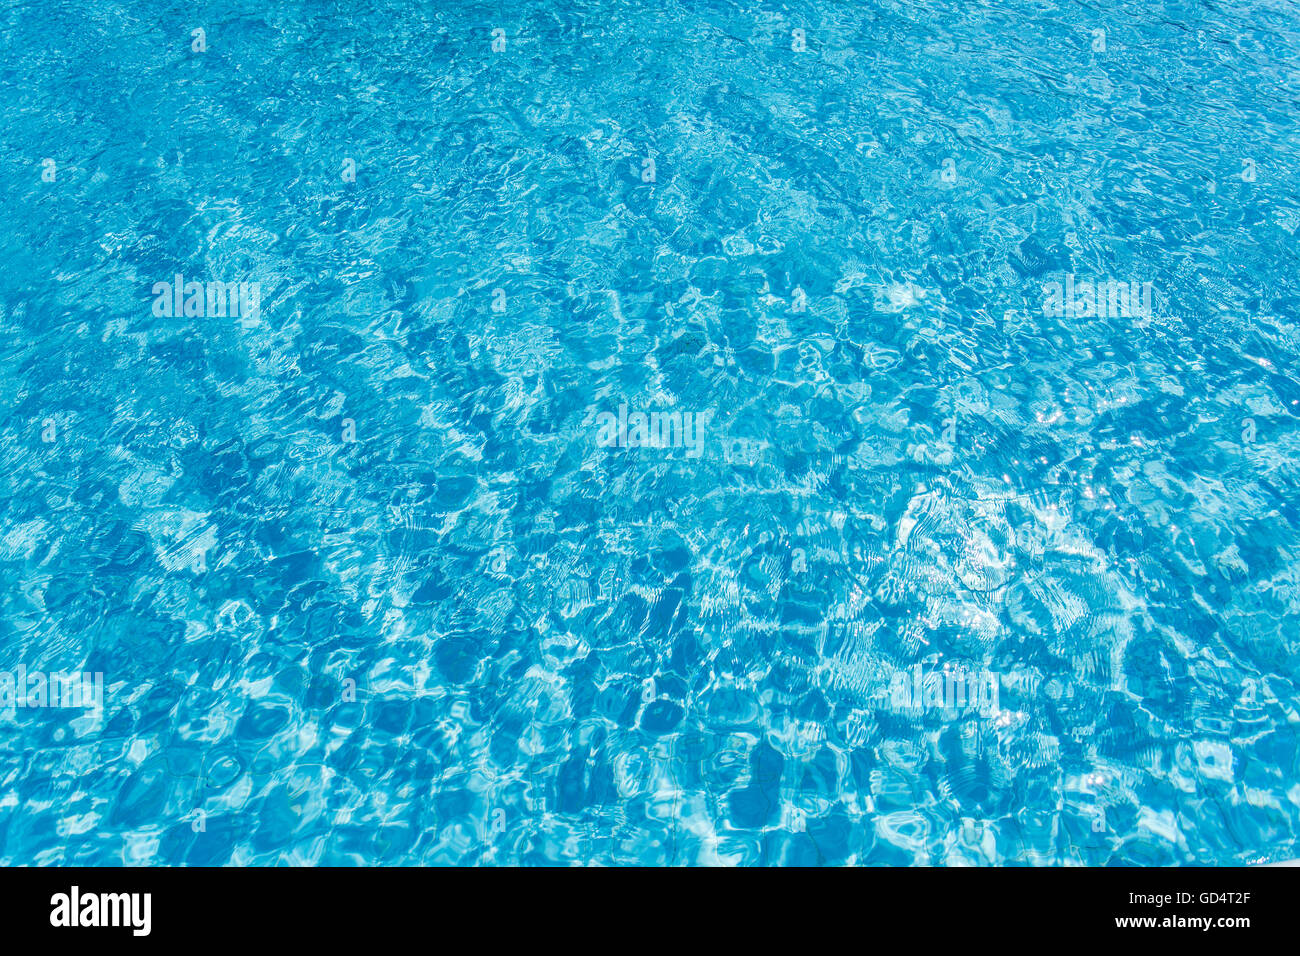 Ripples on the water in the swimming pool. Stock Photo